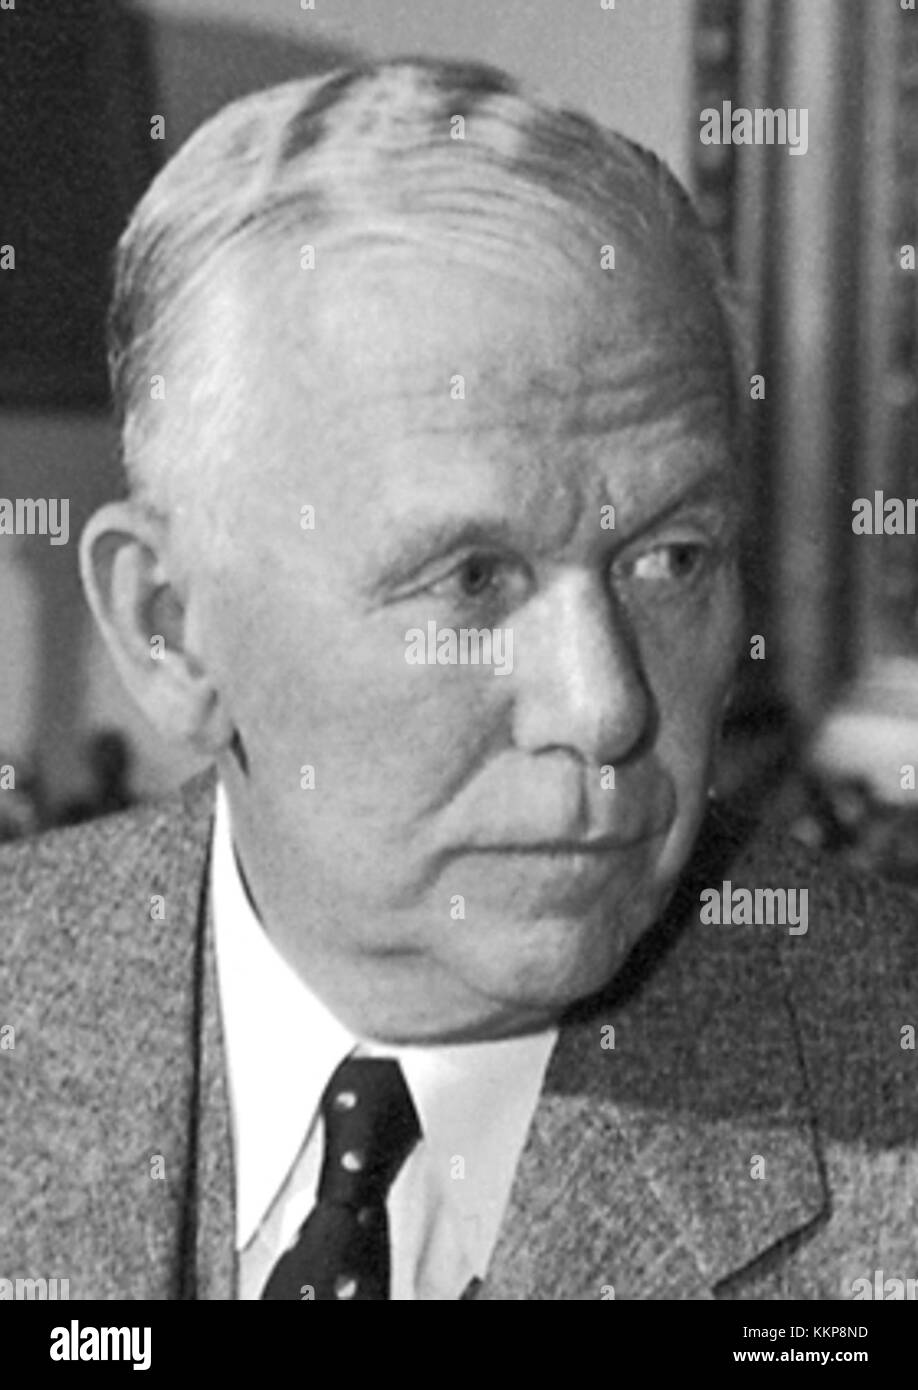 George Marshall High Resolution Stock Photography and Images - Alamy